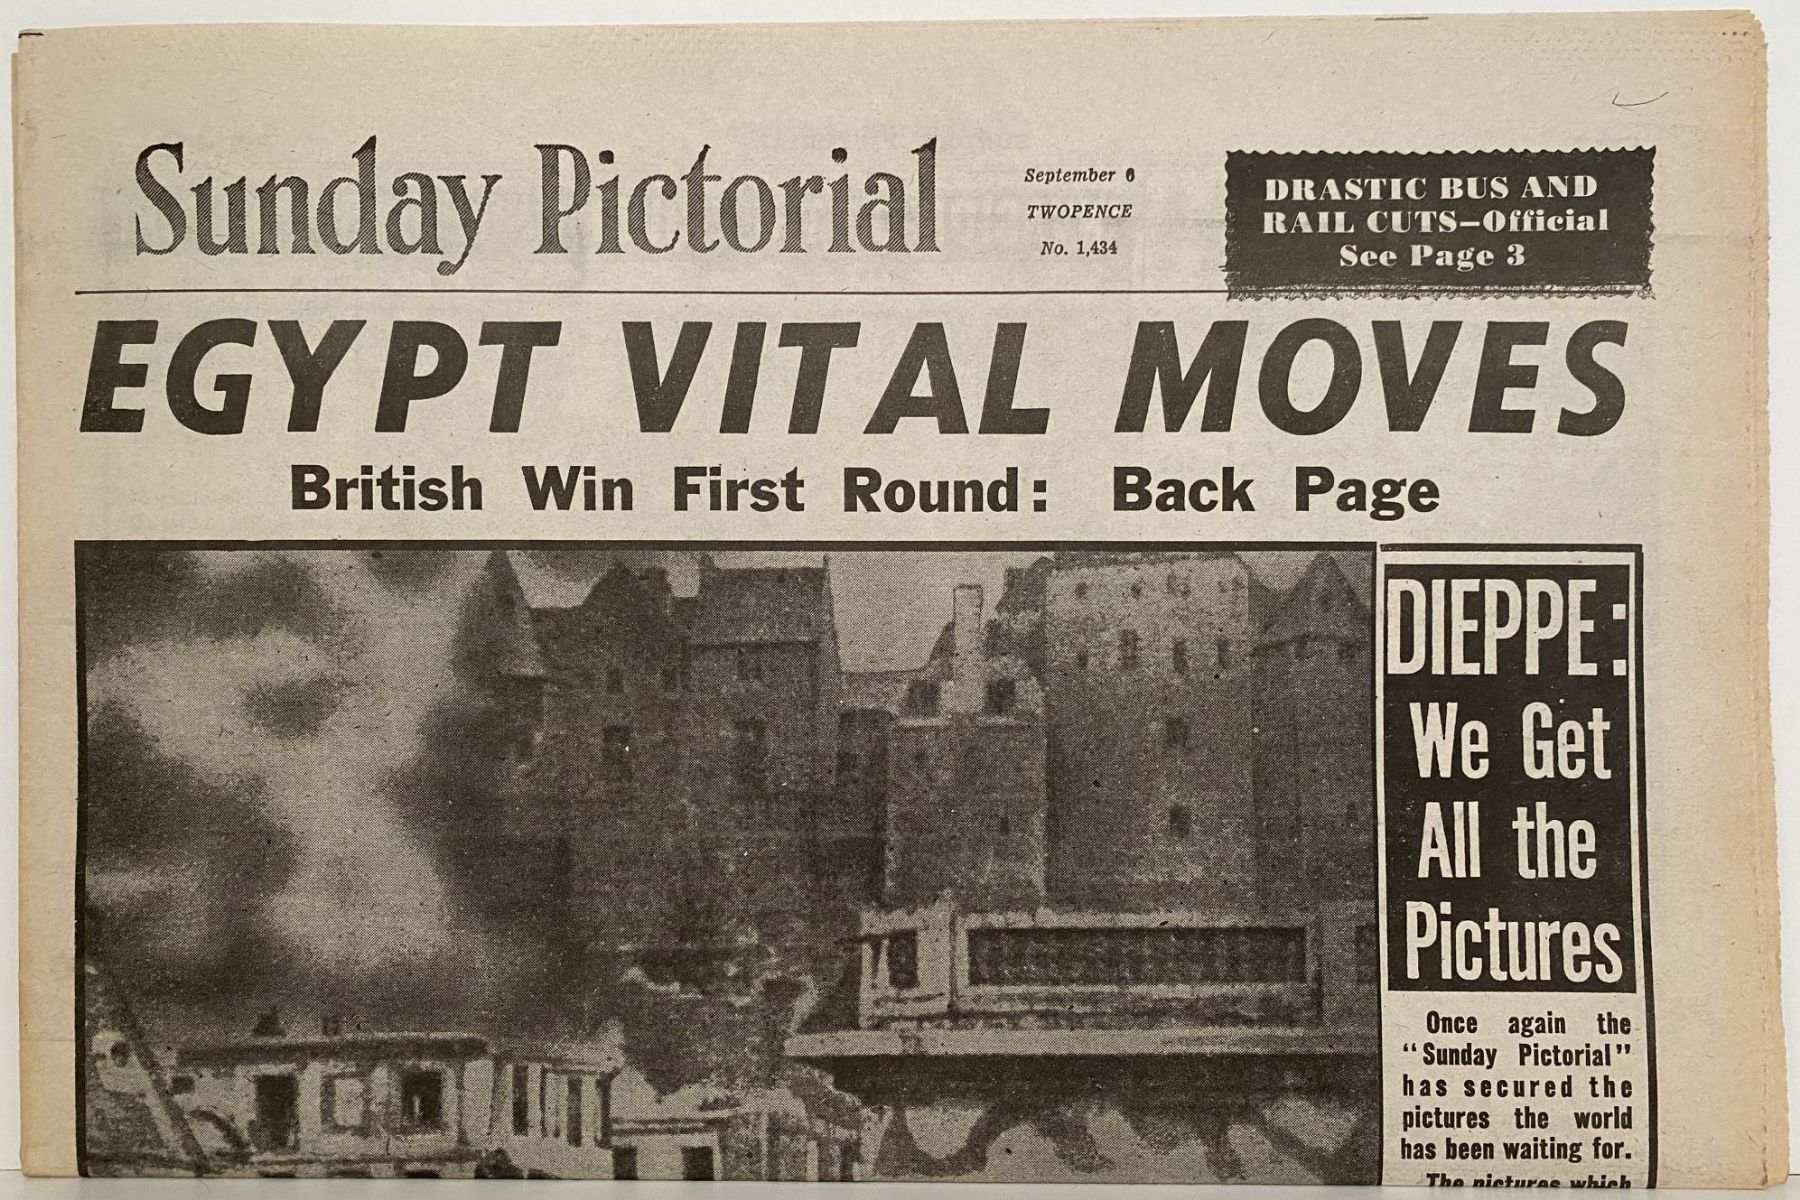 OLD WARTIME NEWSPAPER: Sunday Pictorial, Sunday 6th September 1942